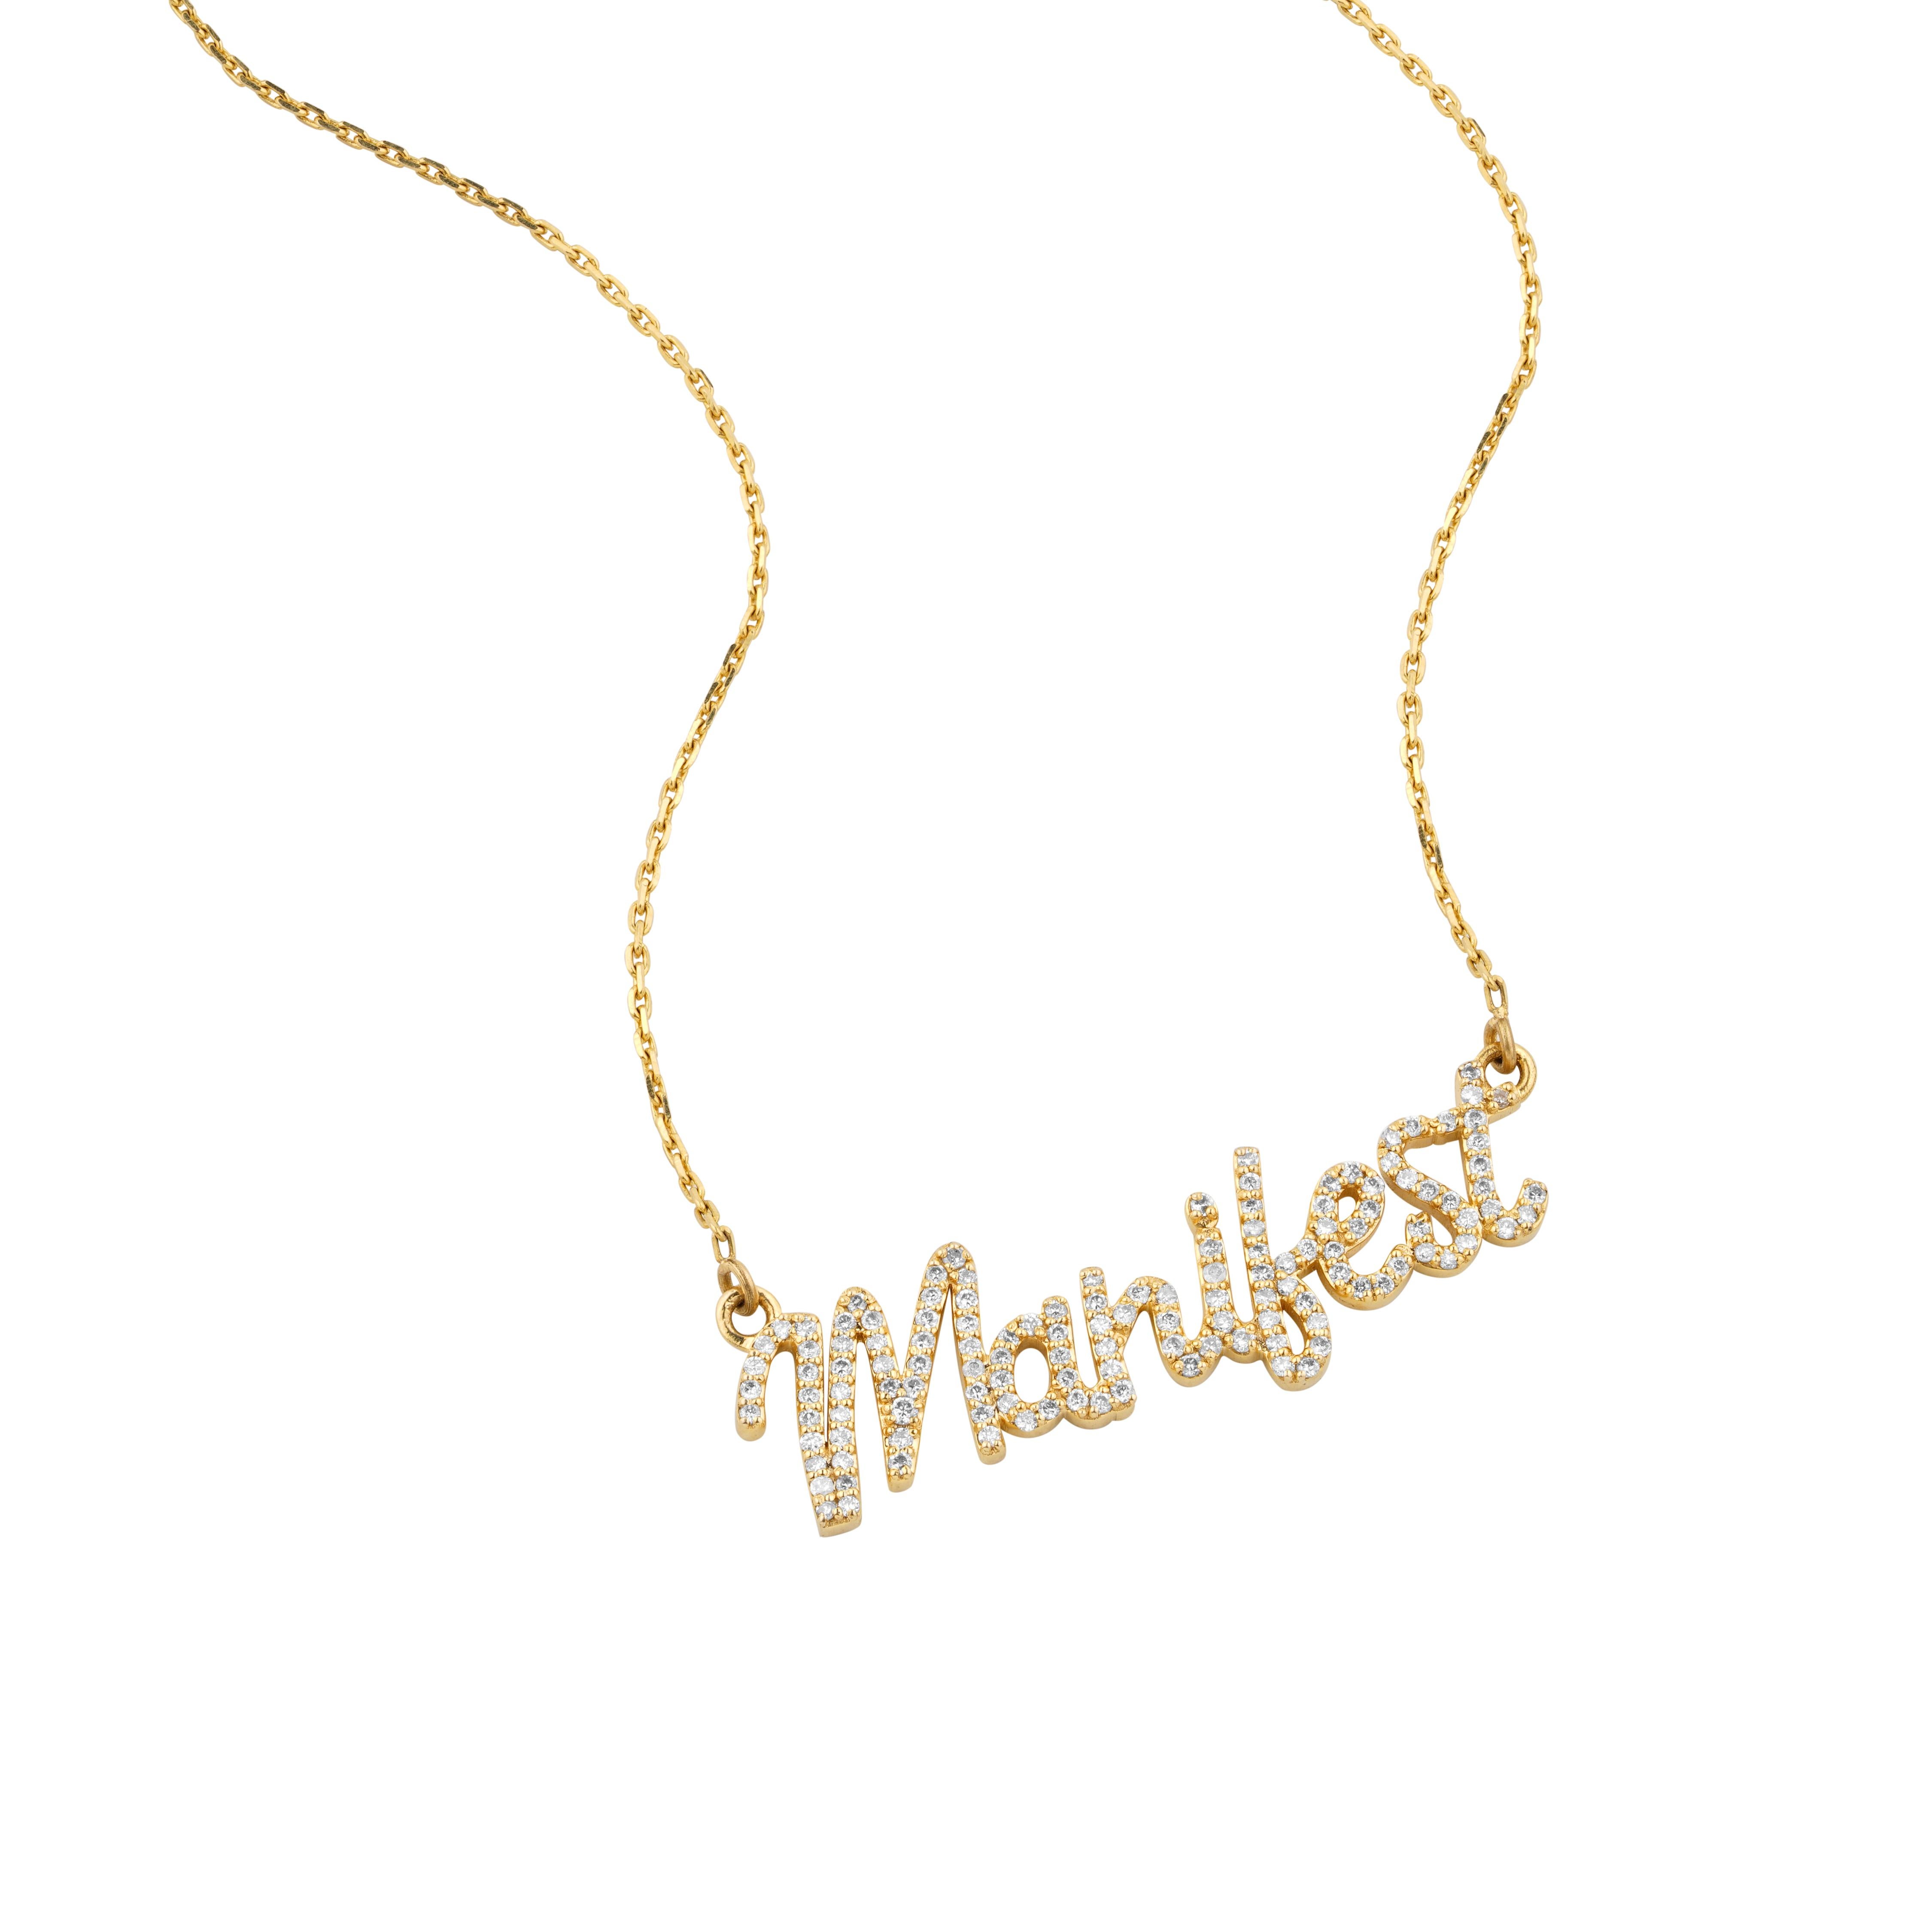 The Diamond Manifest Pendant Necklace is made of 18k Solid Gold with the word 